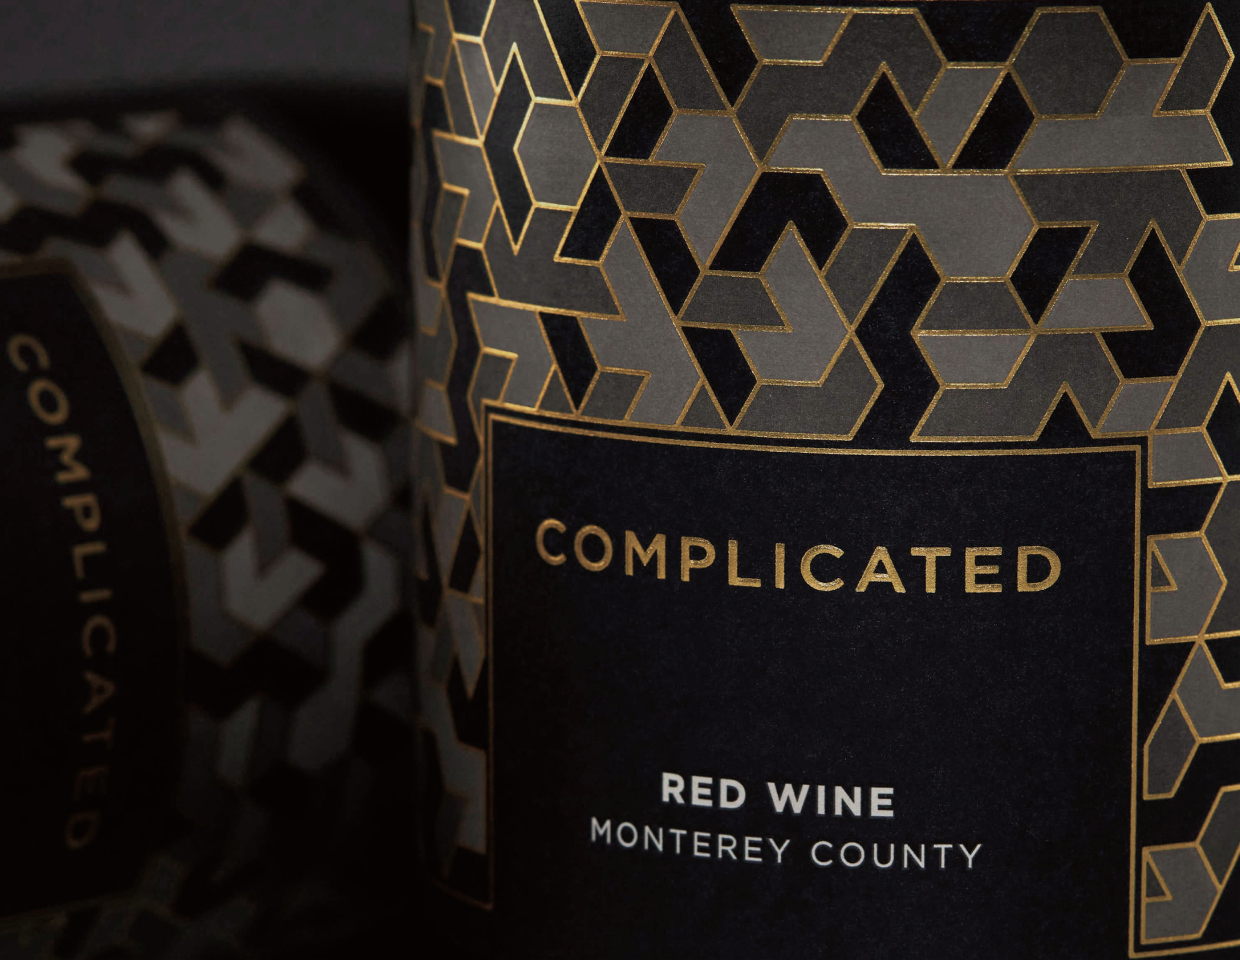 Close up of a bottle of Complicated Red Wine from Monteray County